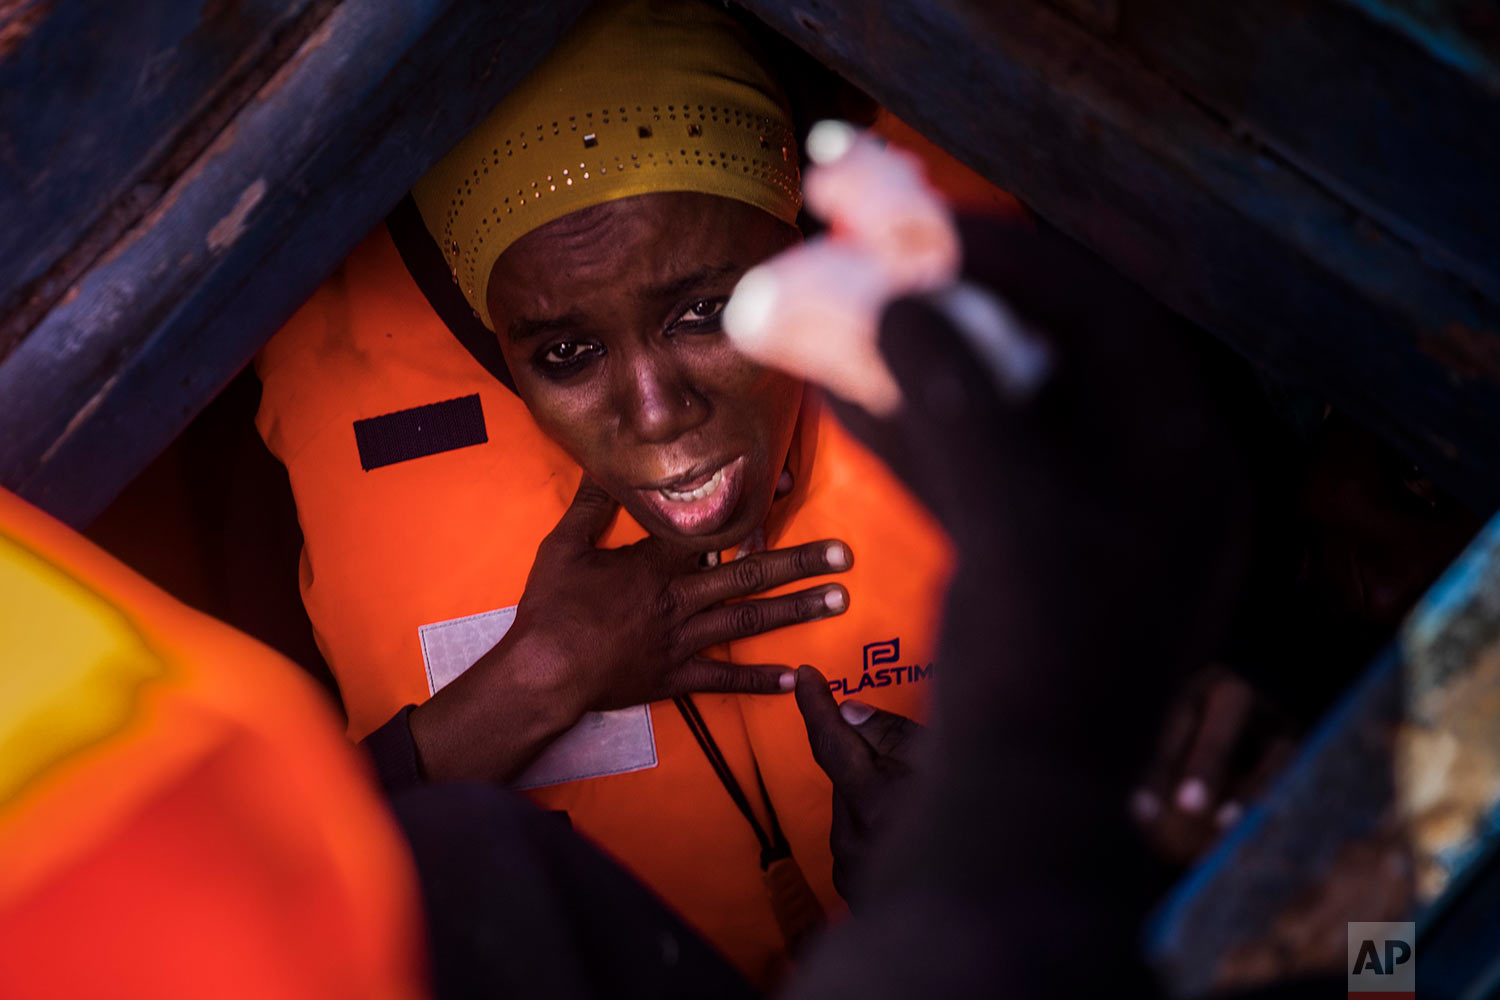  In this Tuesday, Jan. 16, 2018 photo a woman from Eritrea tries to breathe inside the lower deck of a wooden boat with 450 people aboard, as they were trying to leave the Libyan coast and reach European soil, 34 miles north of Kasr-El-Karabulli, Libya. (AP Photo/Santi Palacios)&nbsp; |&nbsp; See these photos on AP Images  